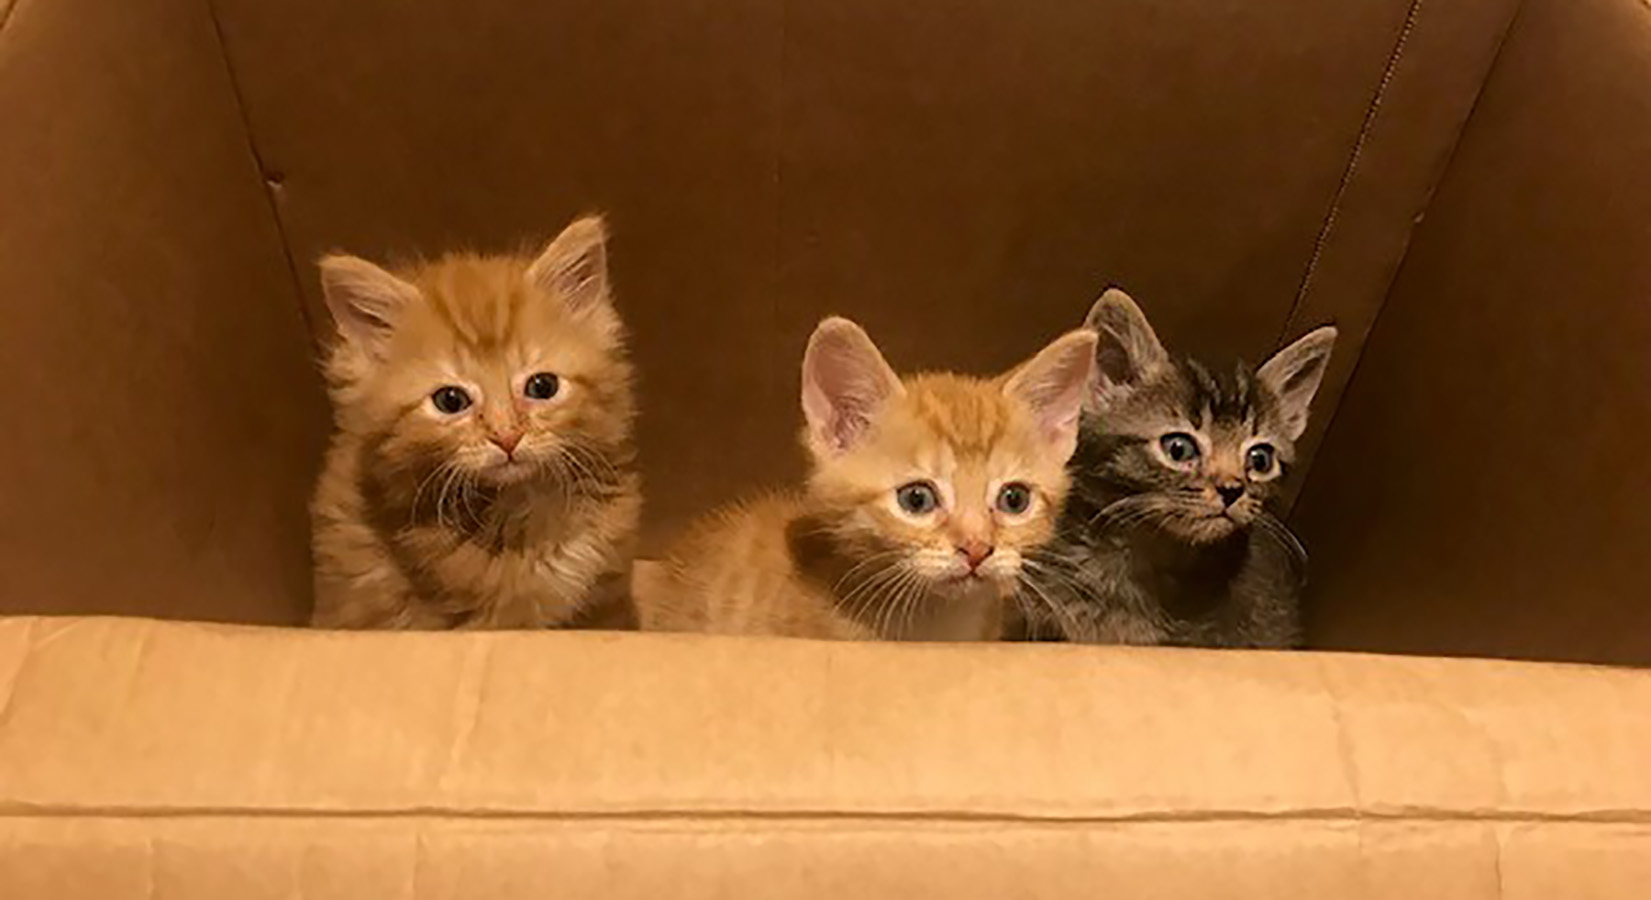 The kittens in the box they were abandoned in